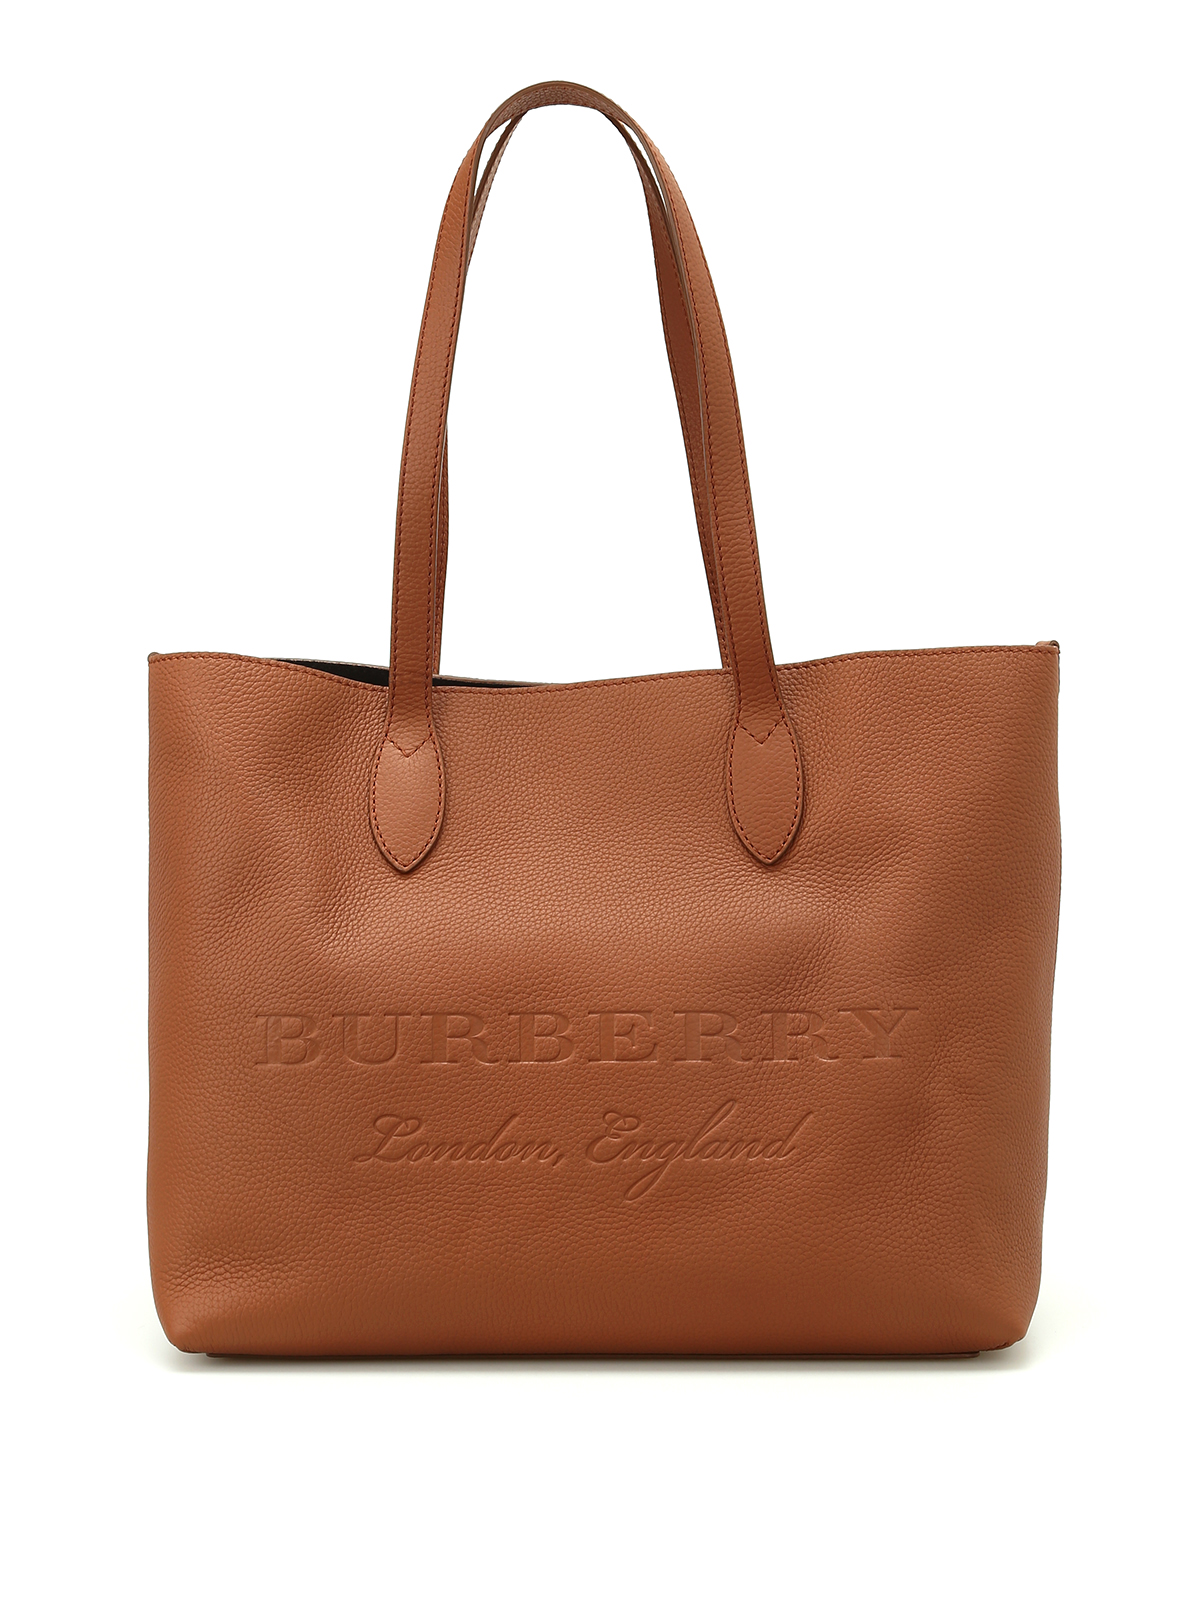 Burberry - Remington brown leather large tote - totes bags - 4060092